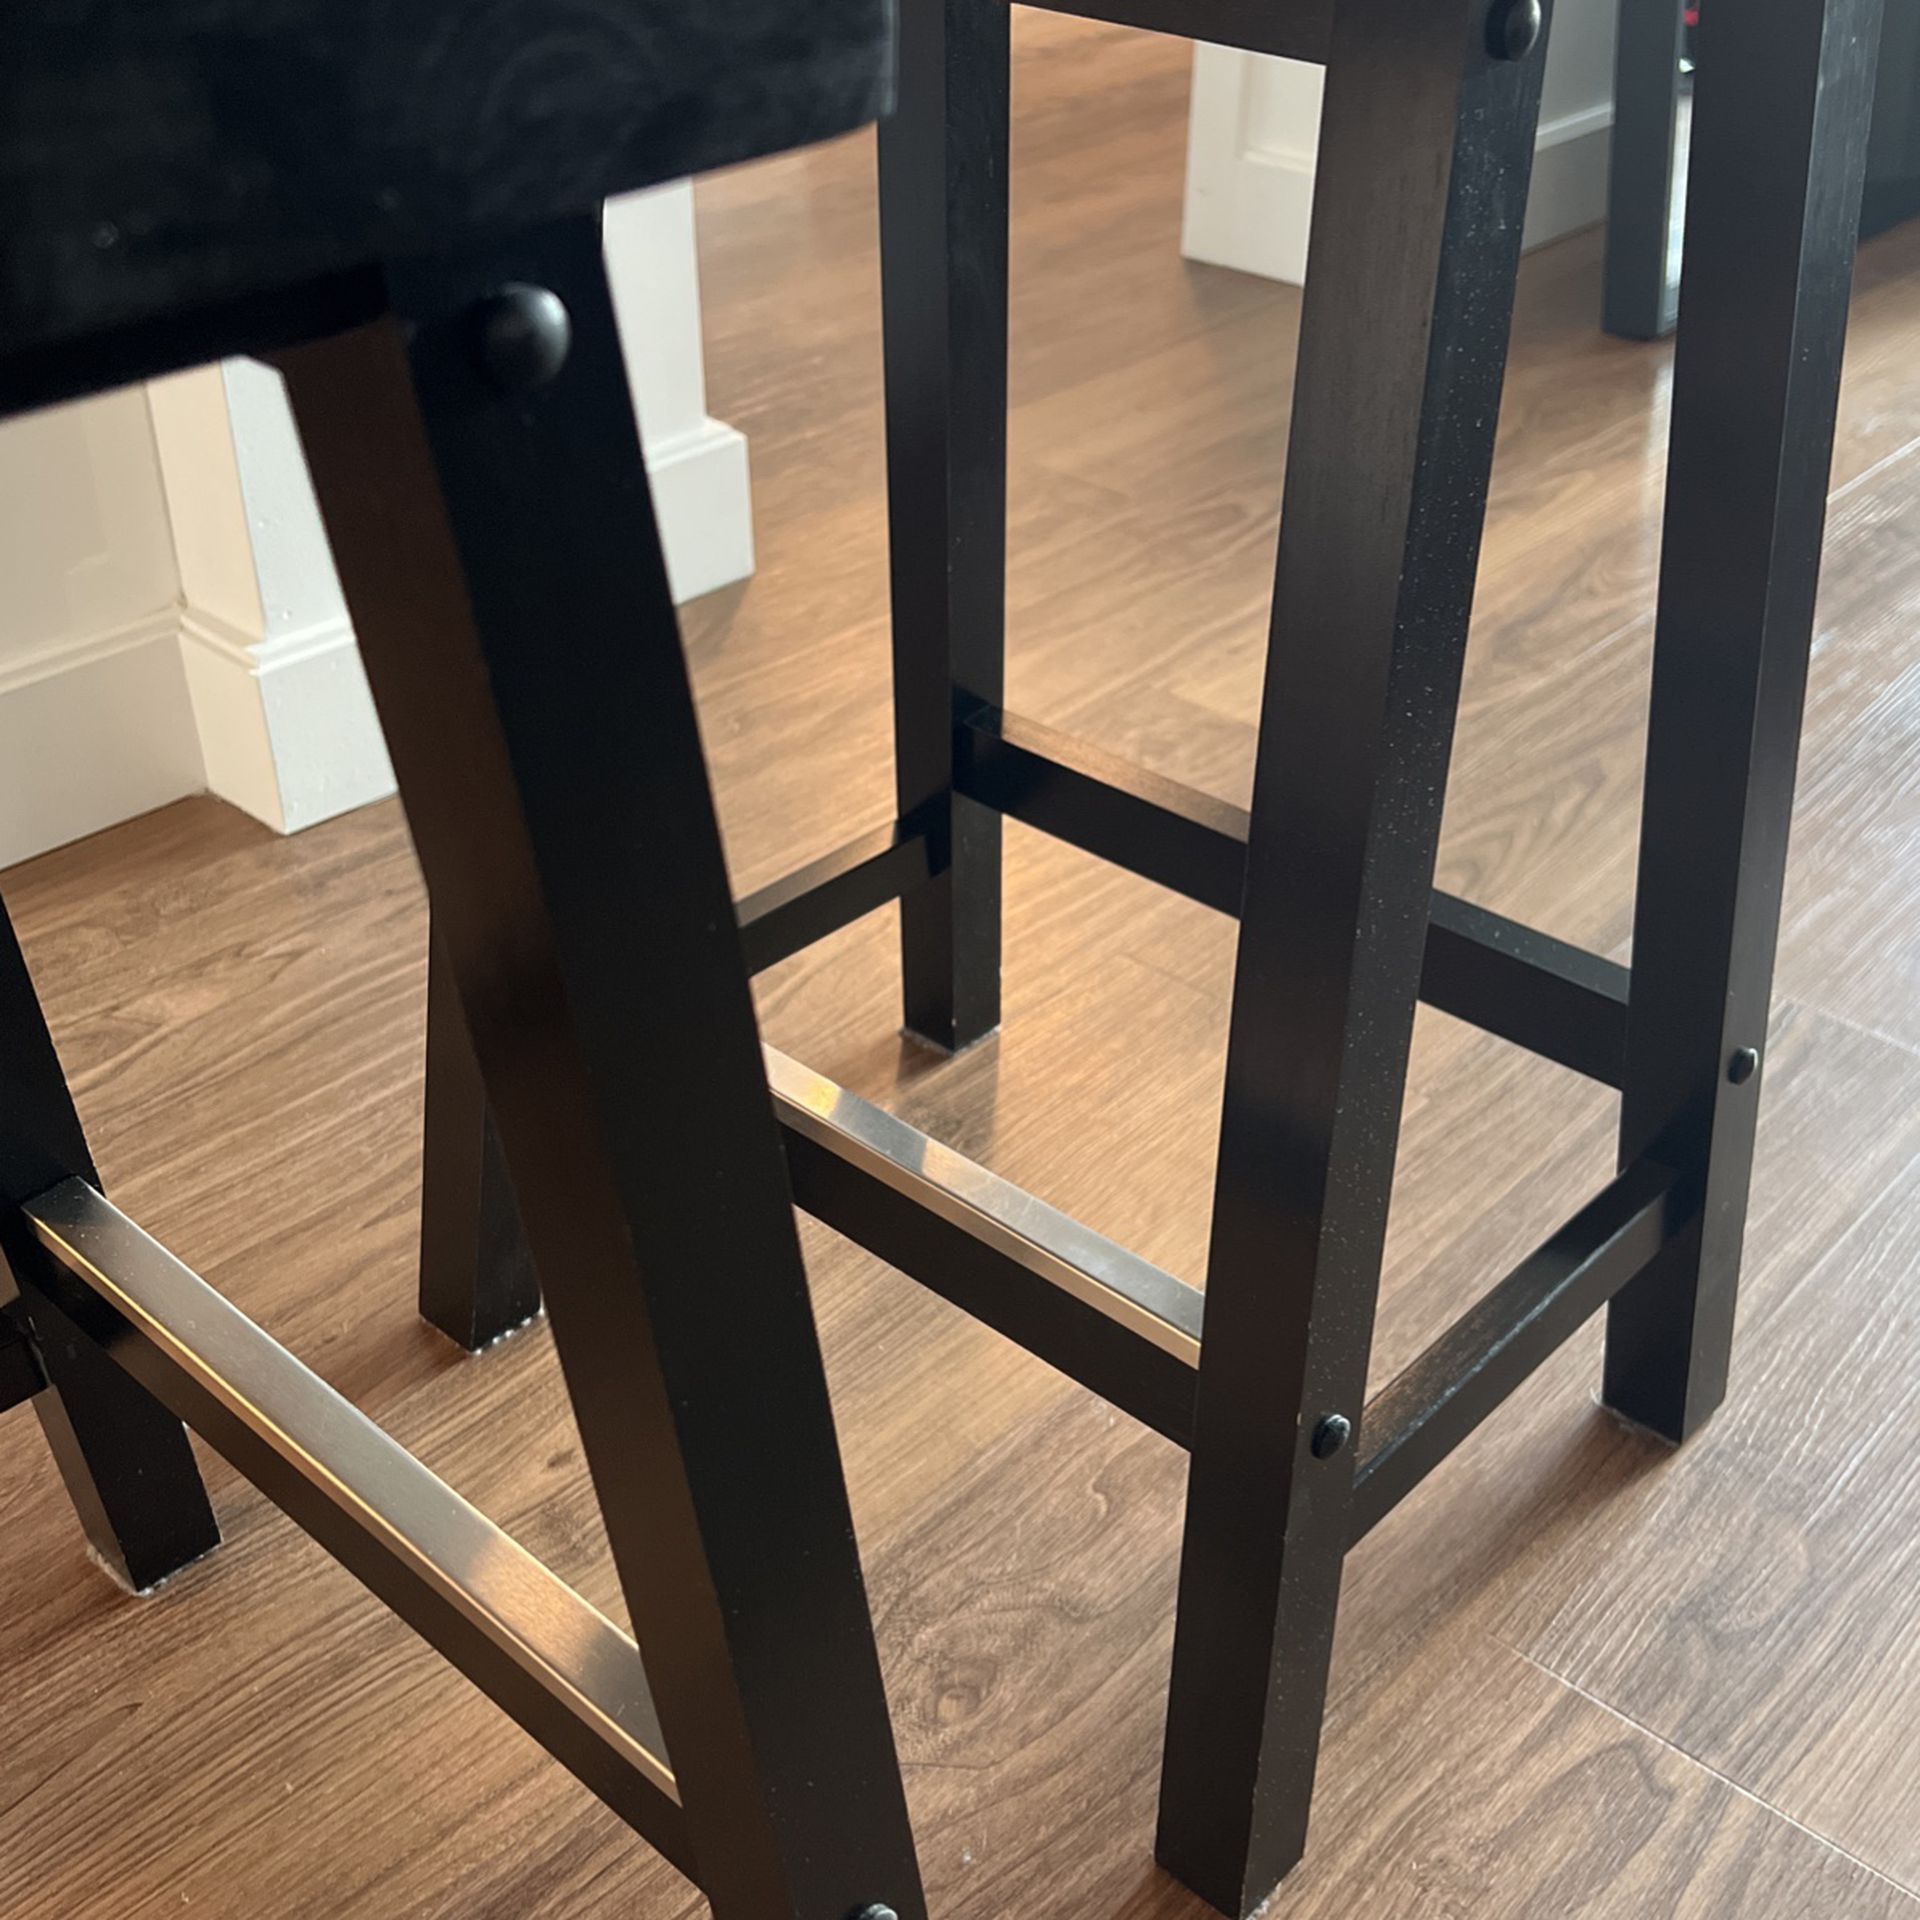 2 Counter Height Barstools